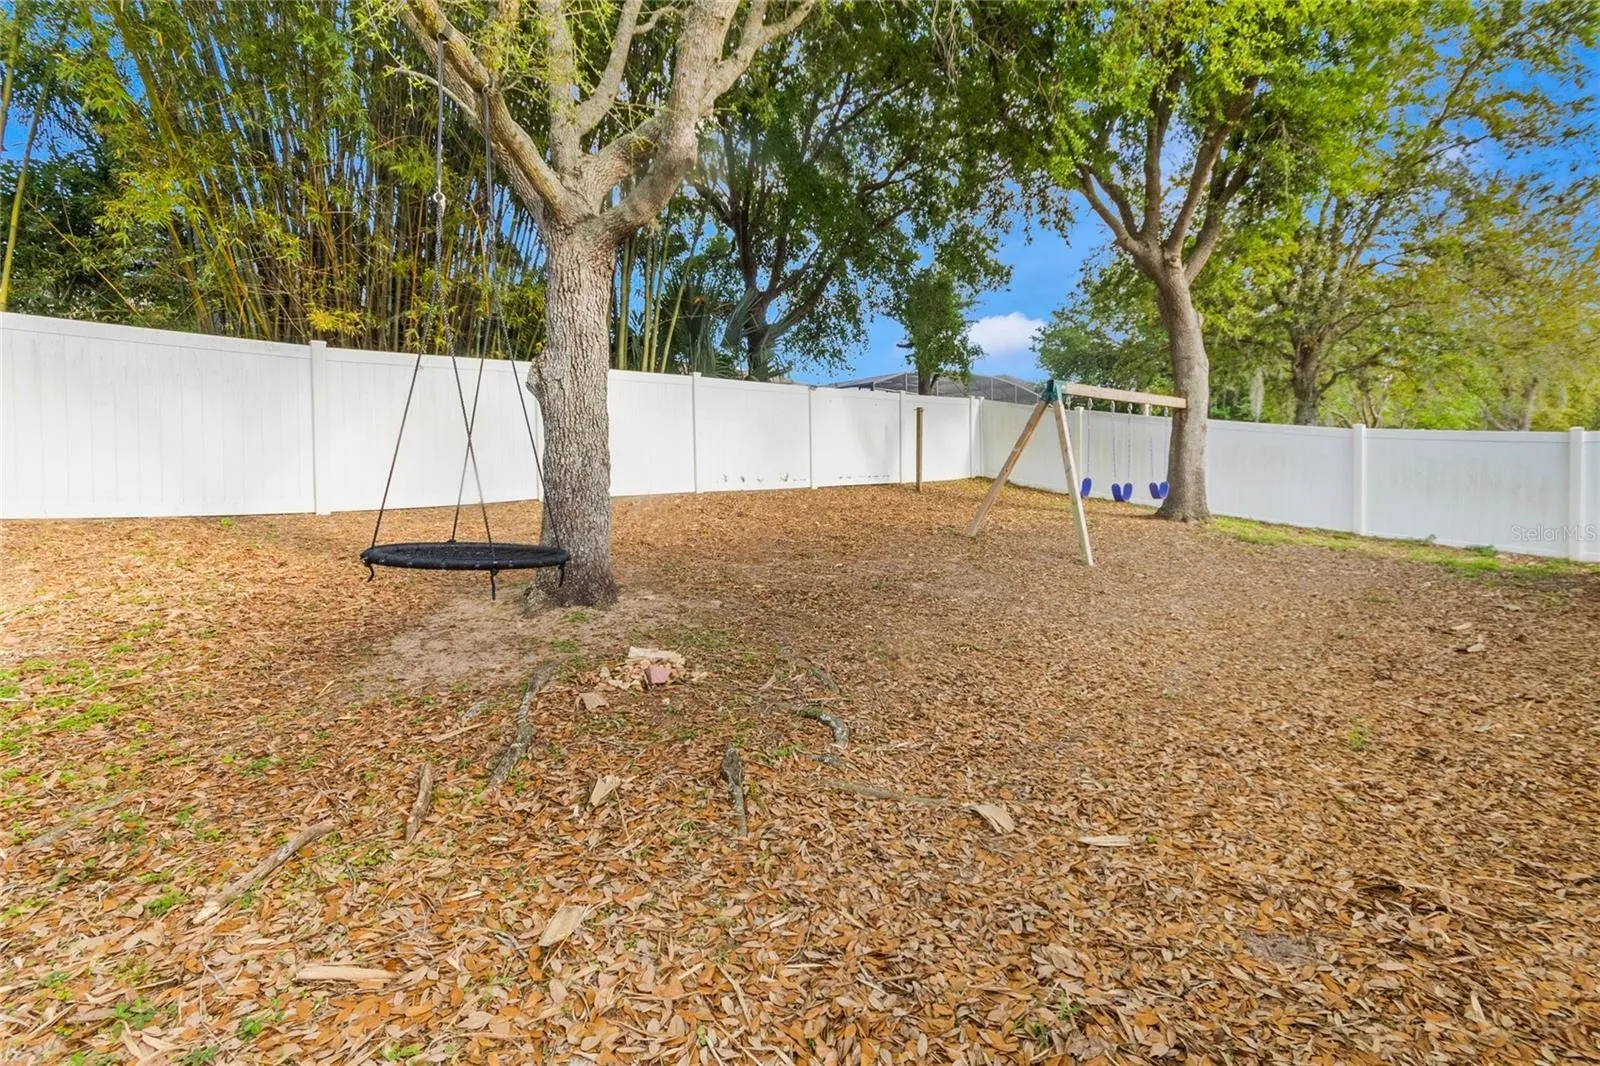 fenced in backyard with trees and white fence